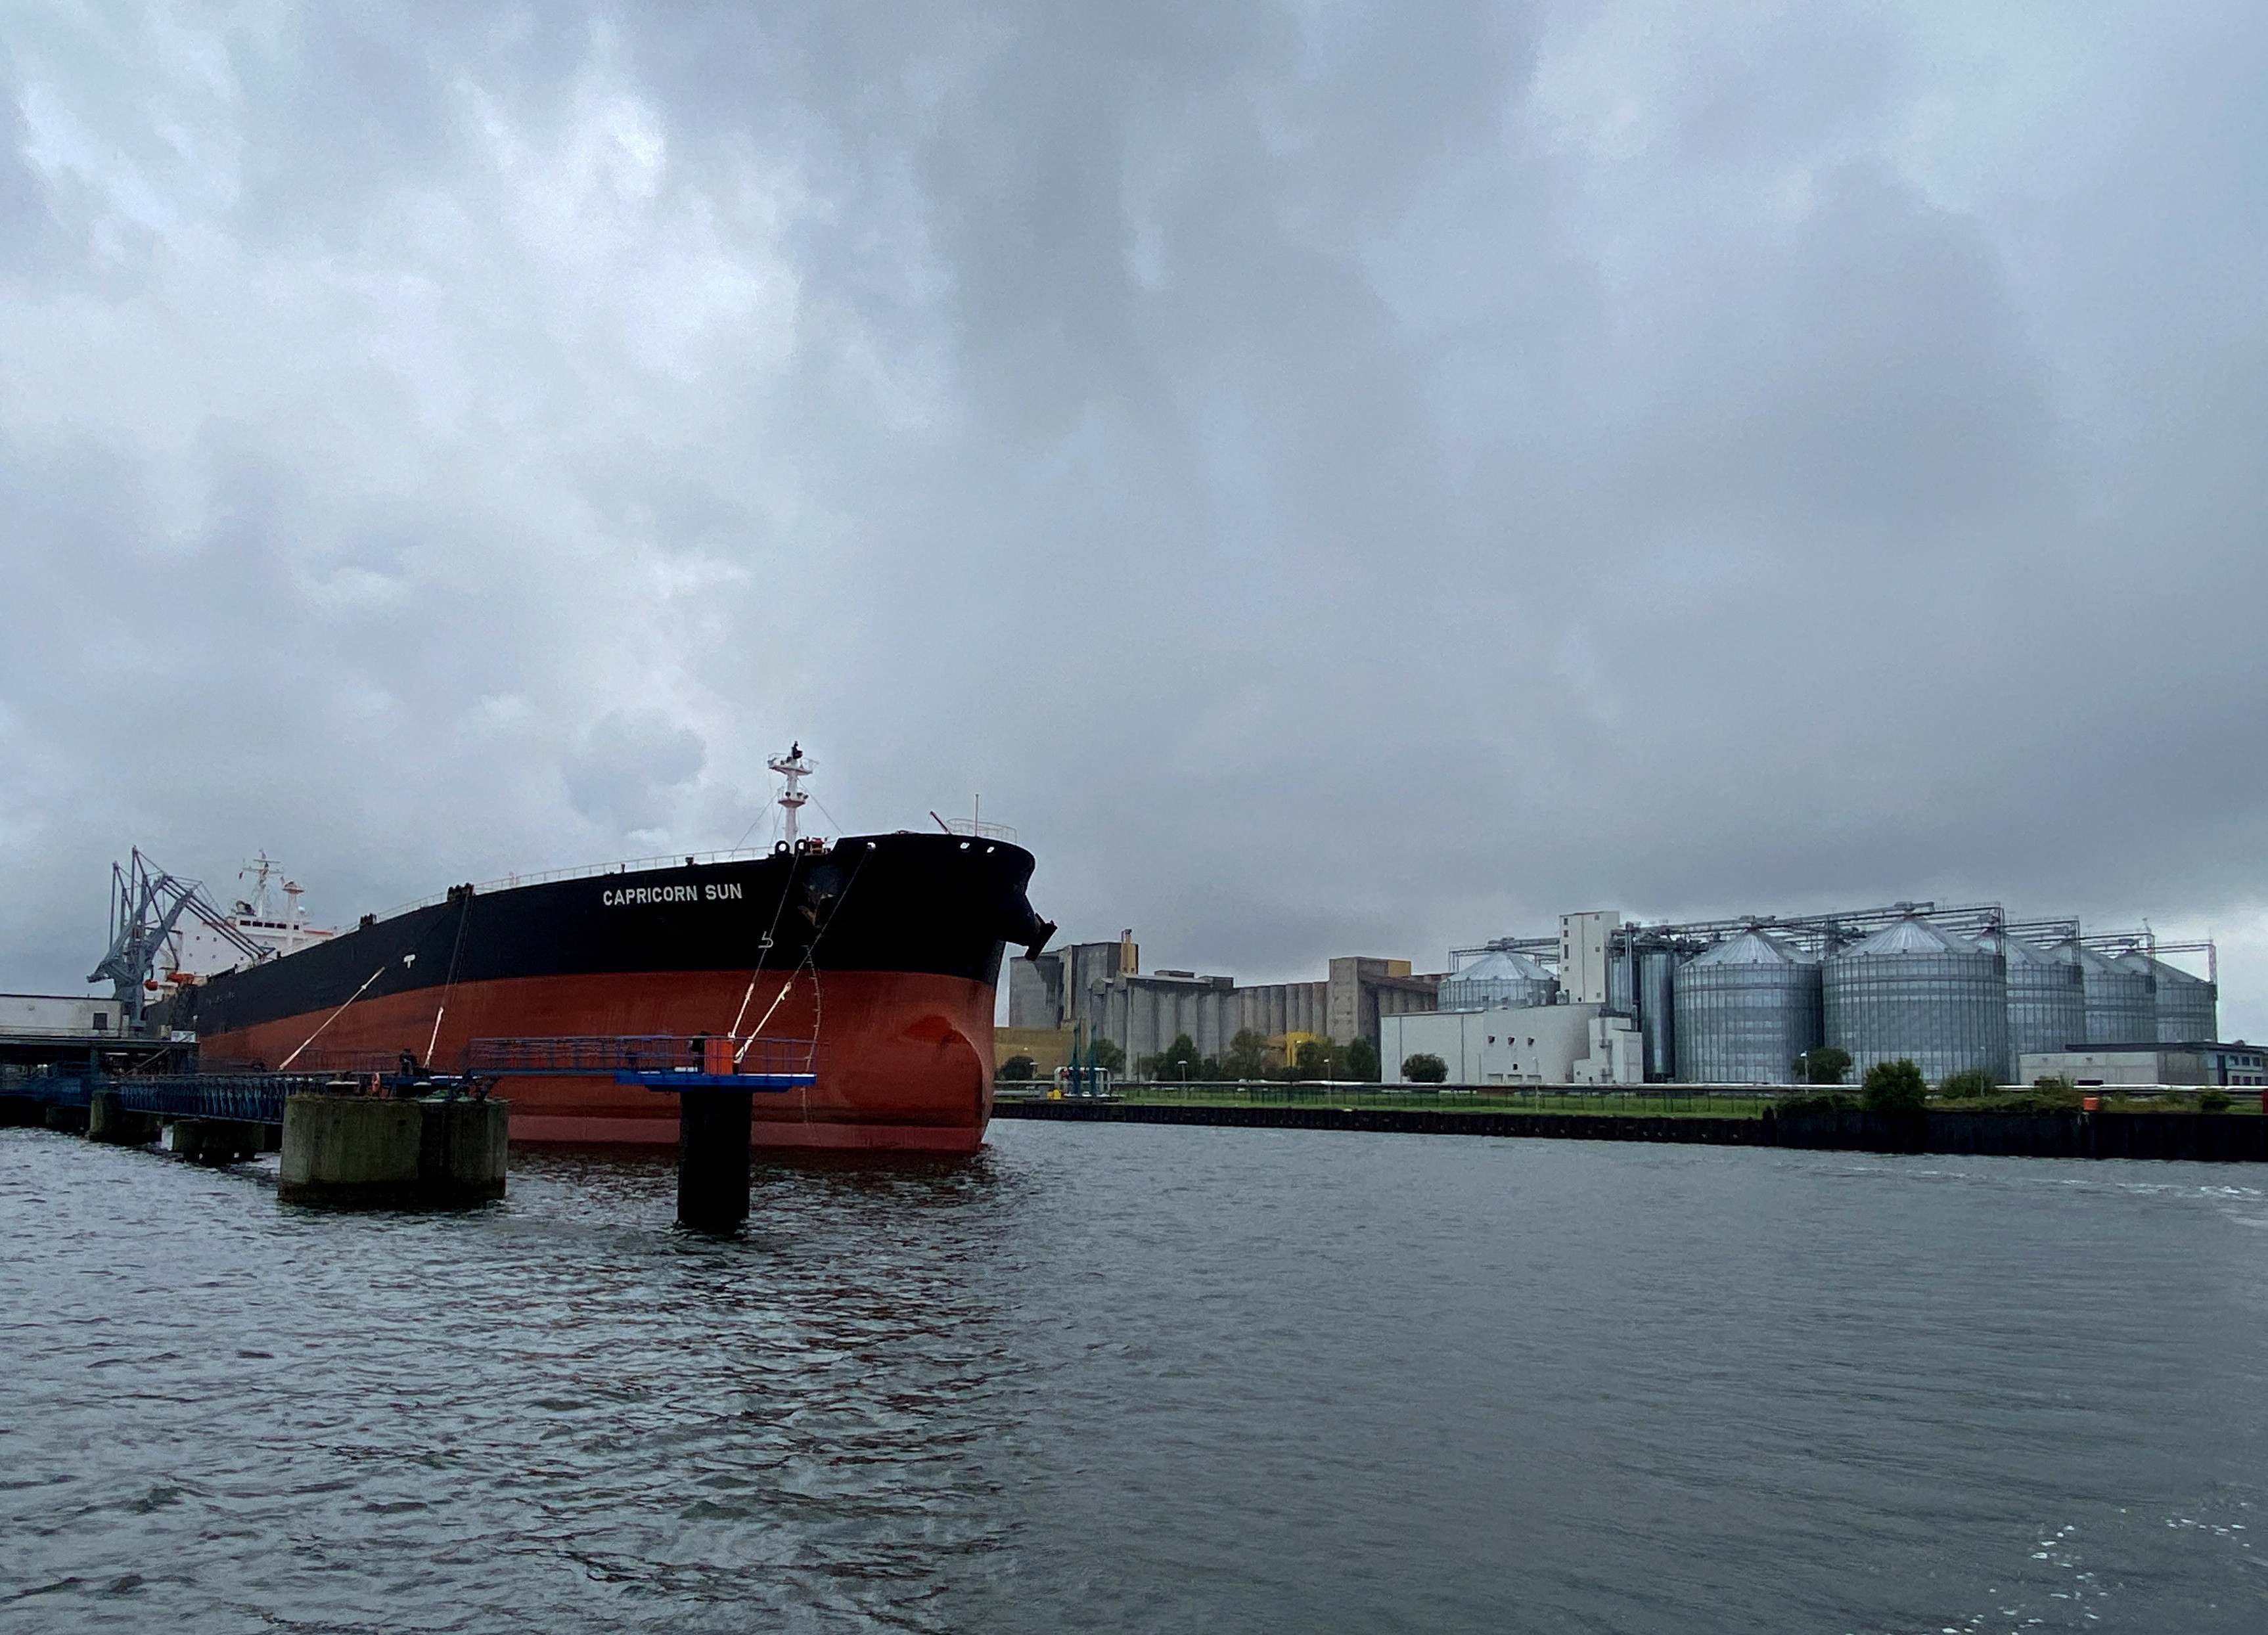 U.S. sour crude cargo sails to Germany as Russia sanctions bite